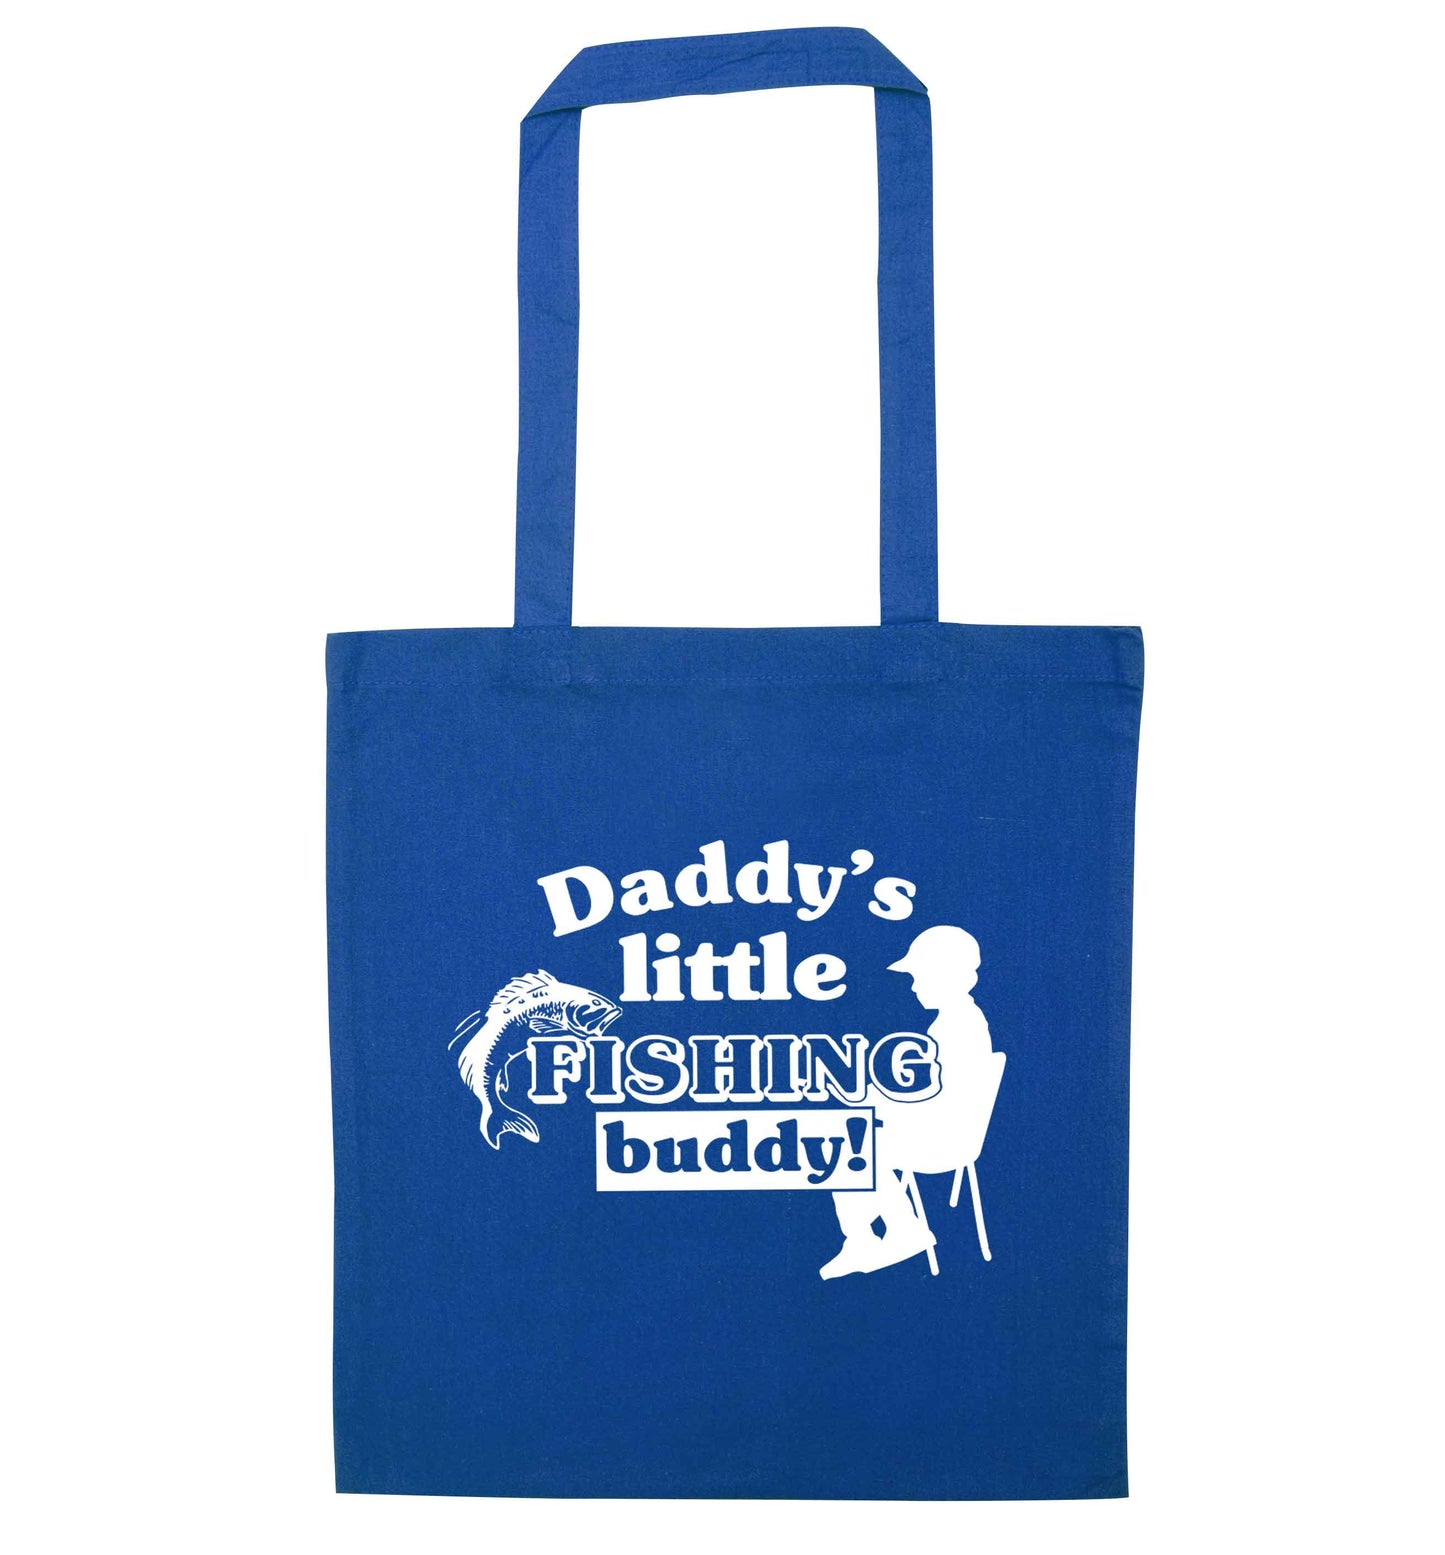 Daddy's little fishing buddy blue tote bag